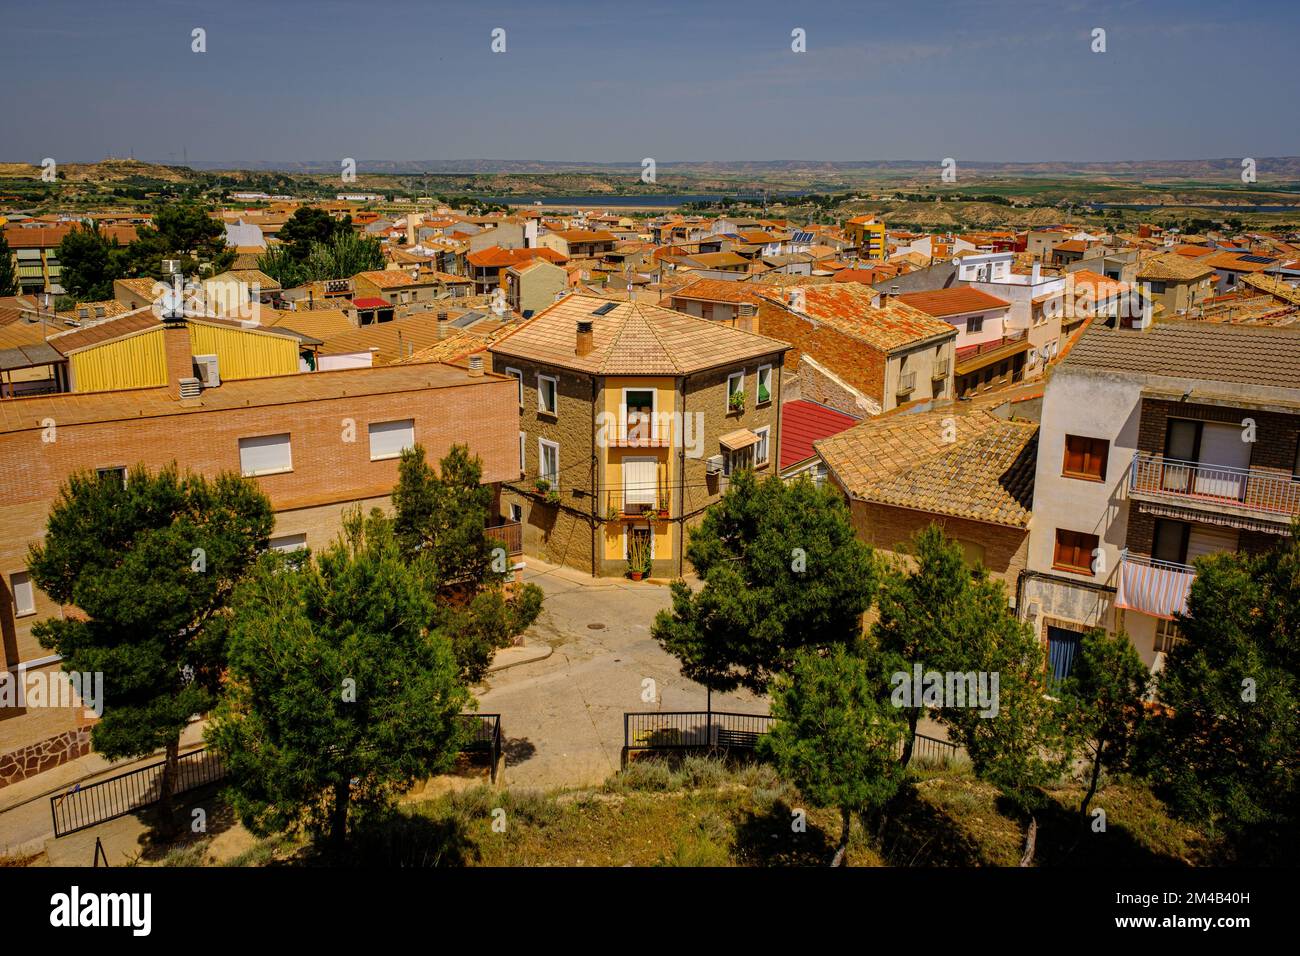 A beautiful shot of the old town of Caspe in the province of Zaragoza, Spain Stock Photo